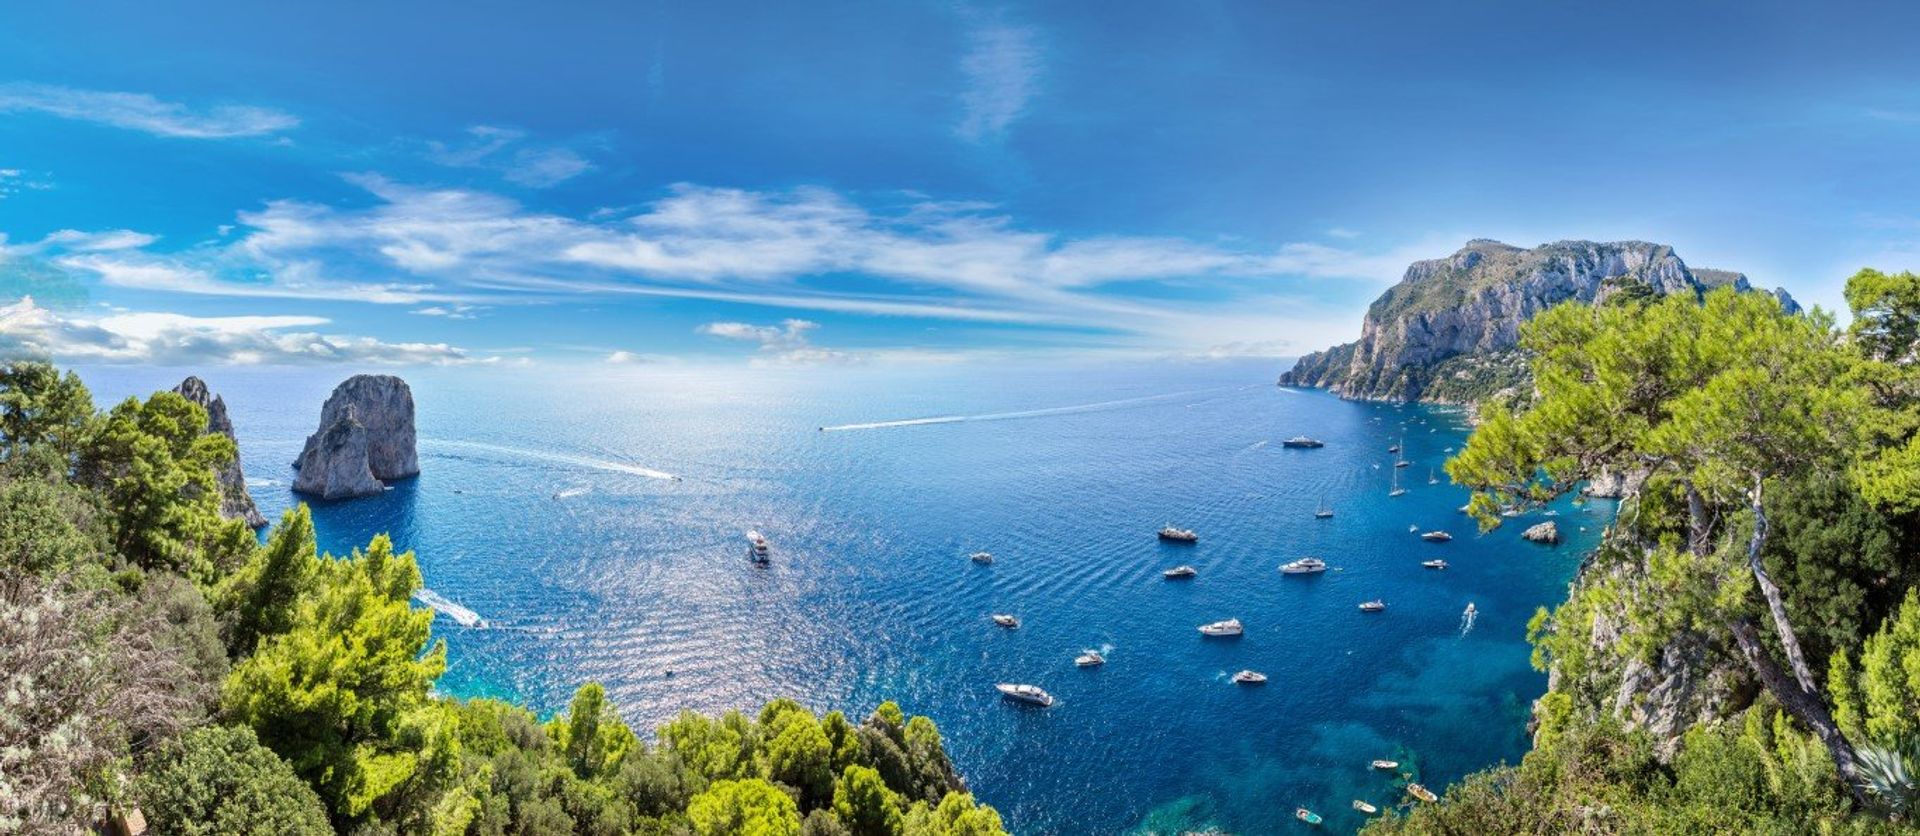 Capri, an island in the Bay of Naples is known for its rugged cliffs and Blue Grotto cavern